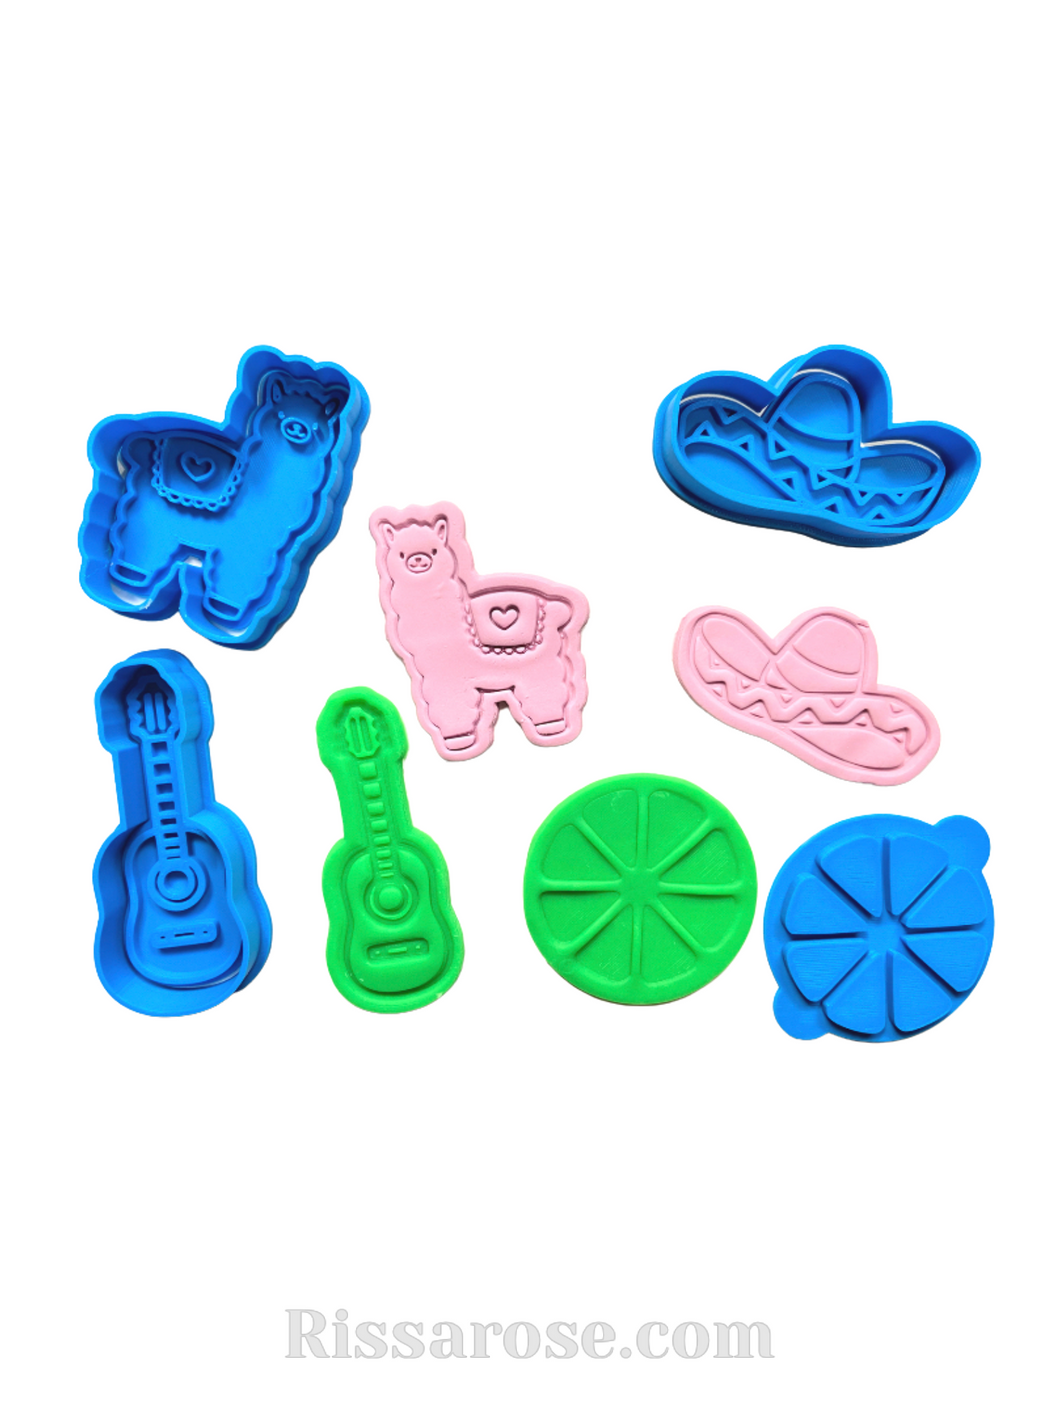 mexican theme cookie cutter stamp - llama, guitar, sombrero, lime